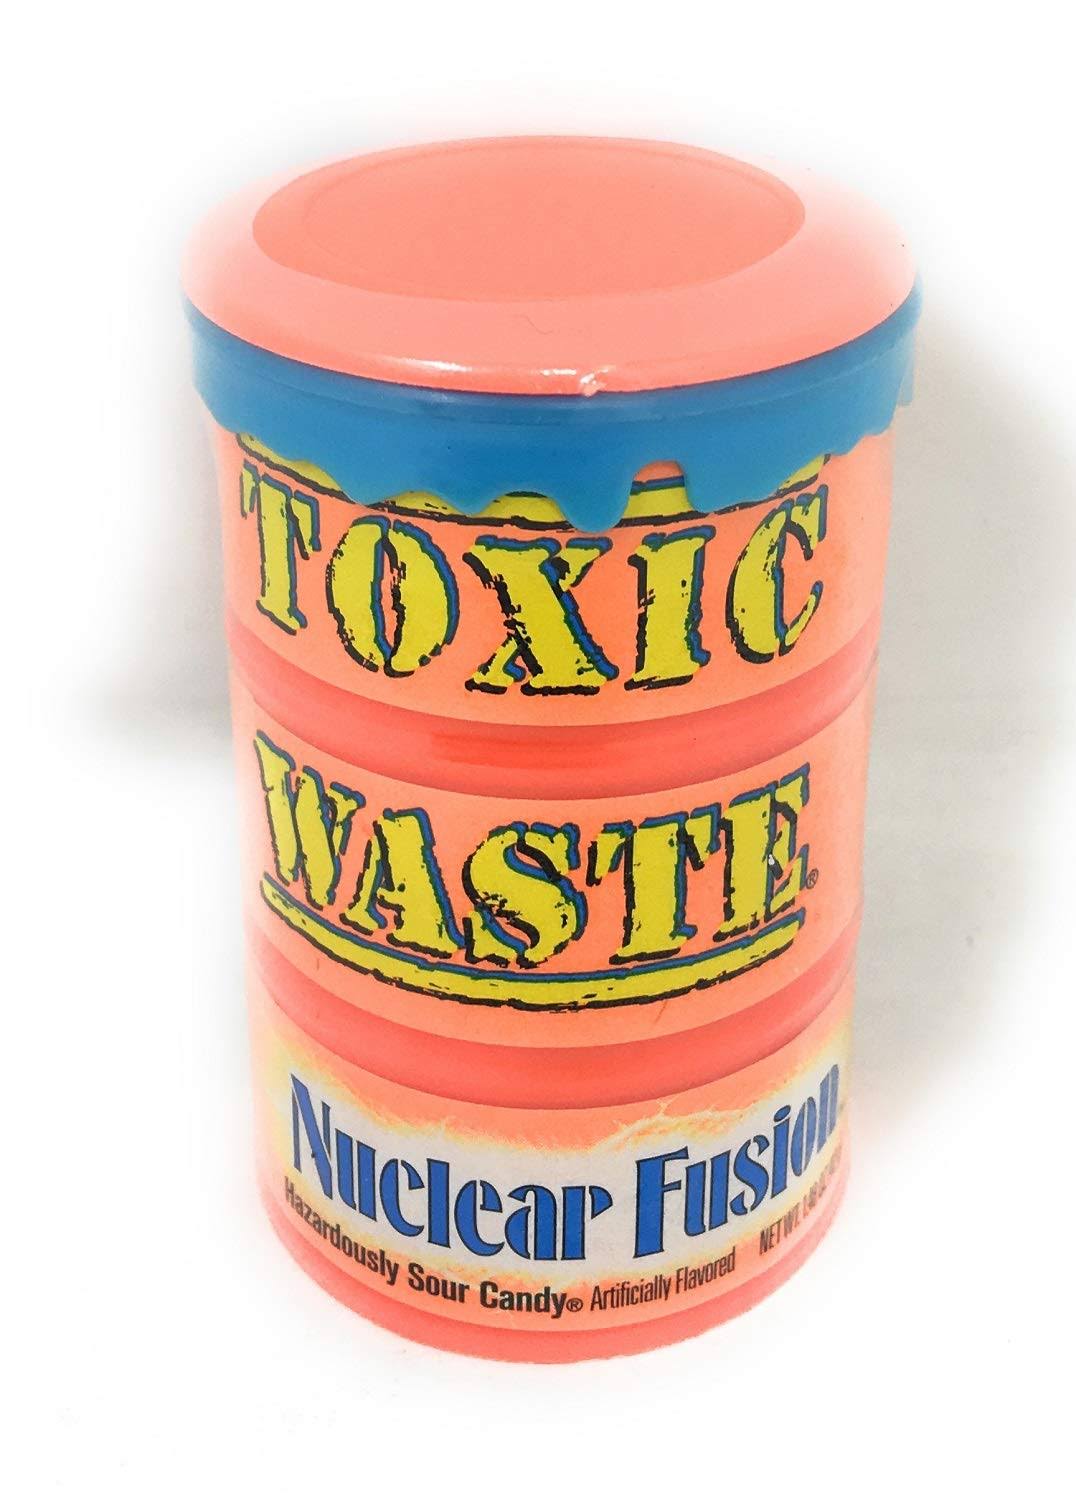 Toxic Waste Nuclear Fusion Drums Extreme Sour Candy - 1.48oz, 12ct